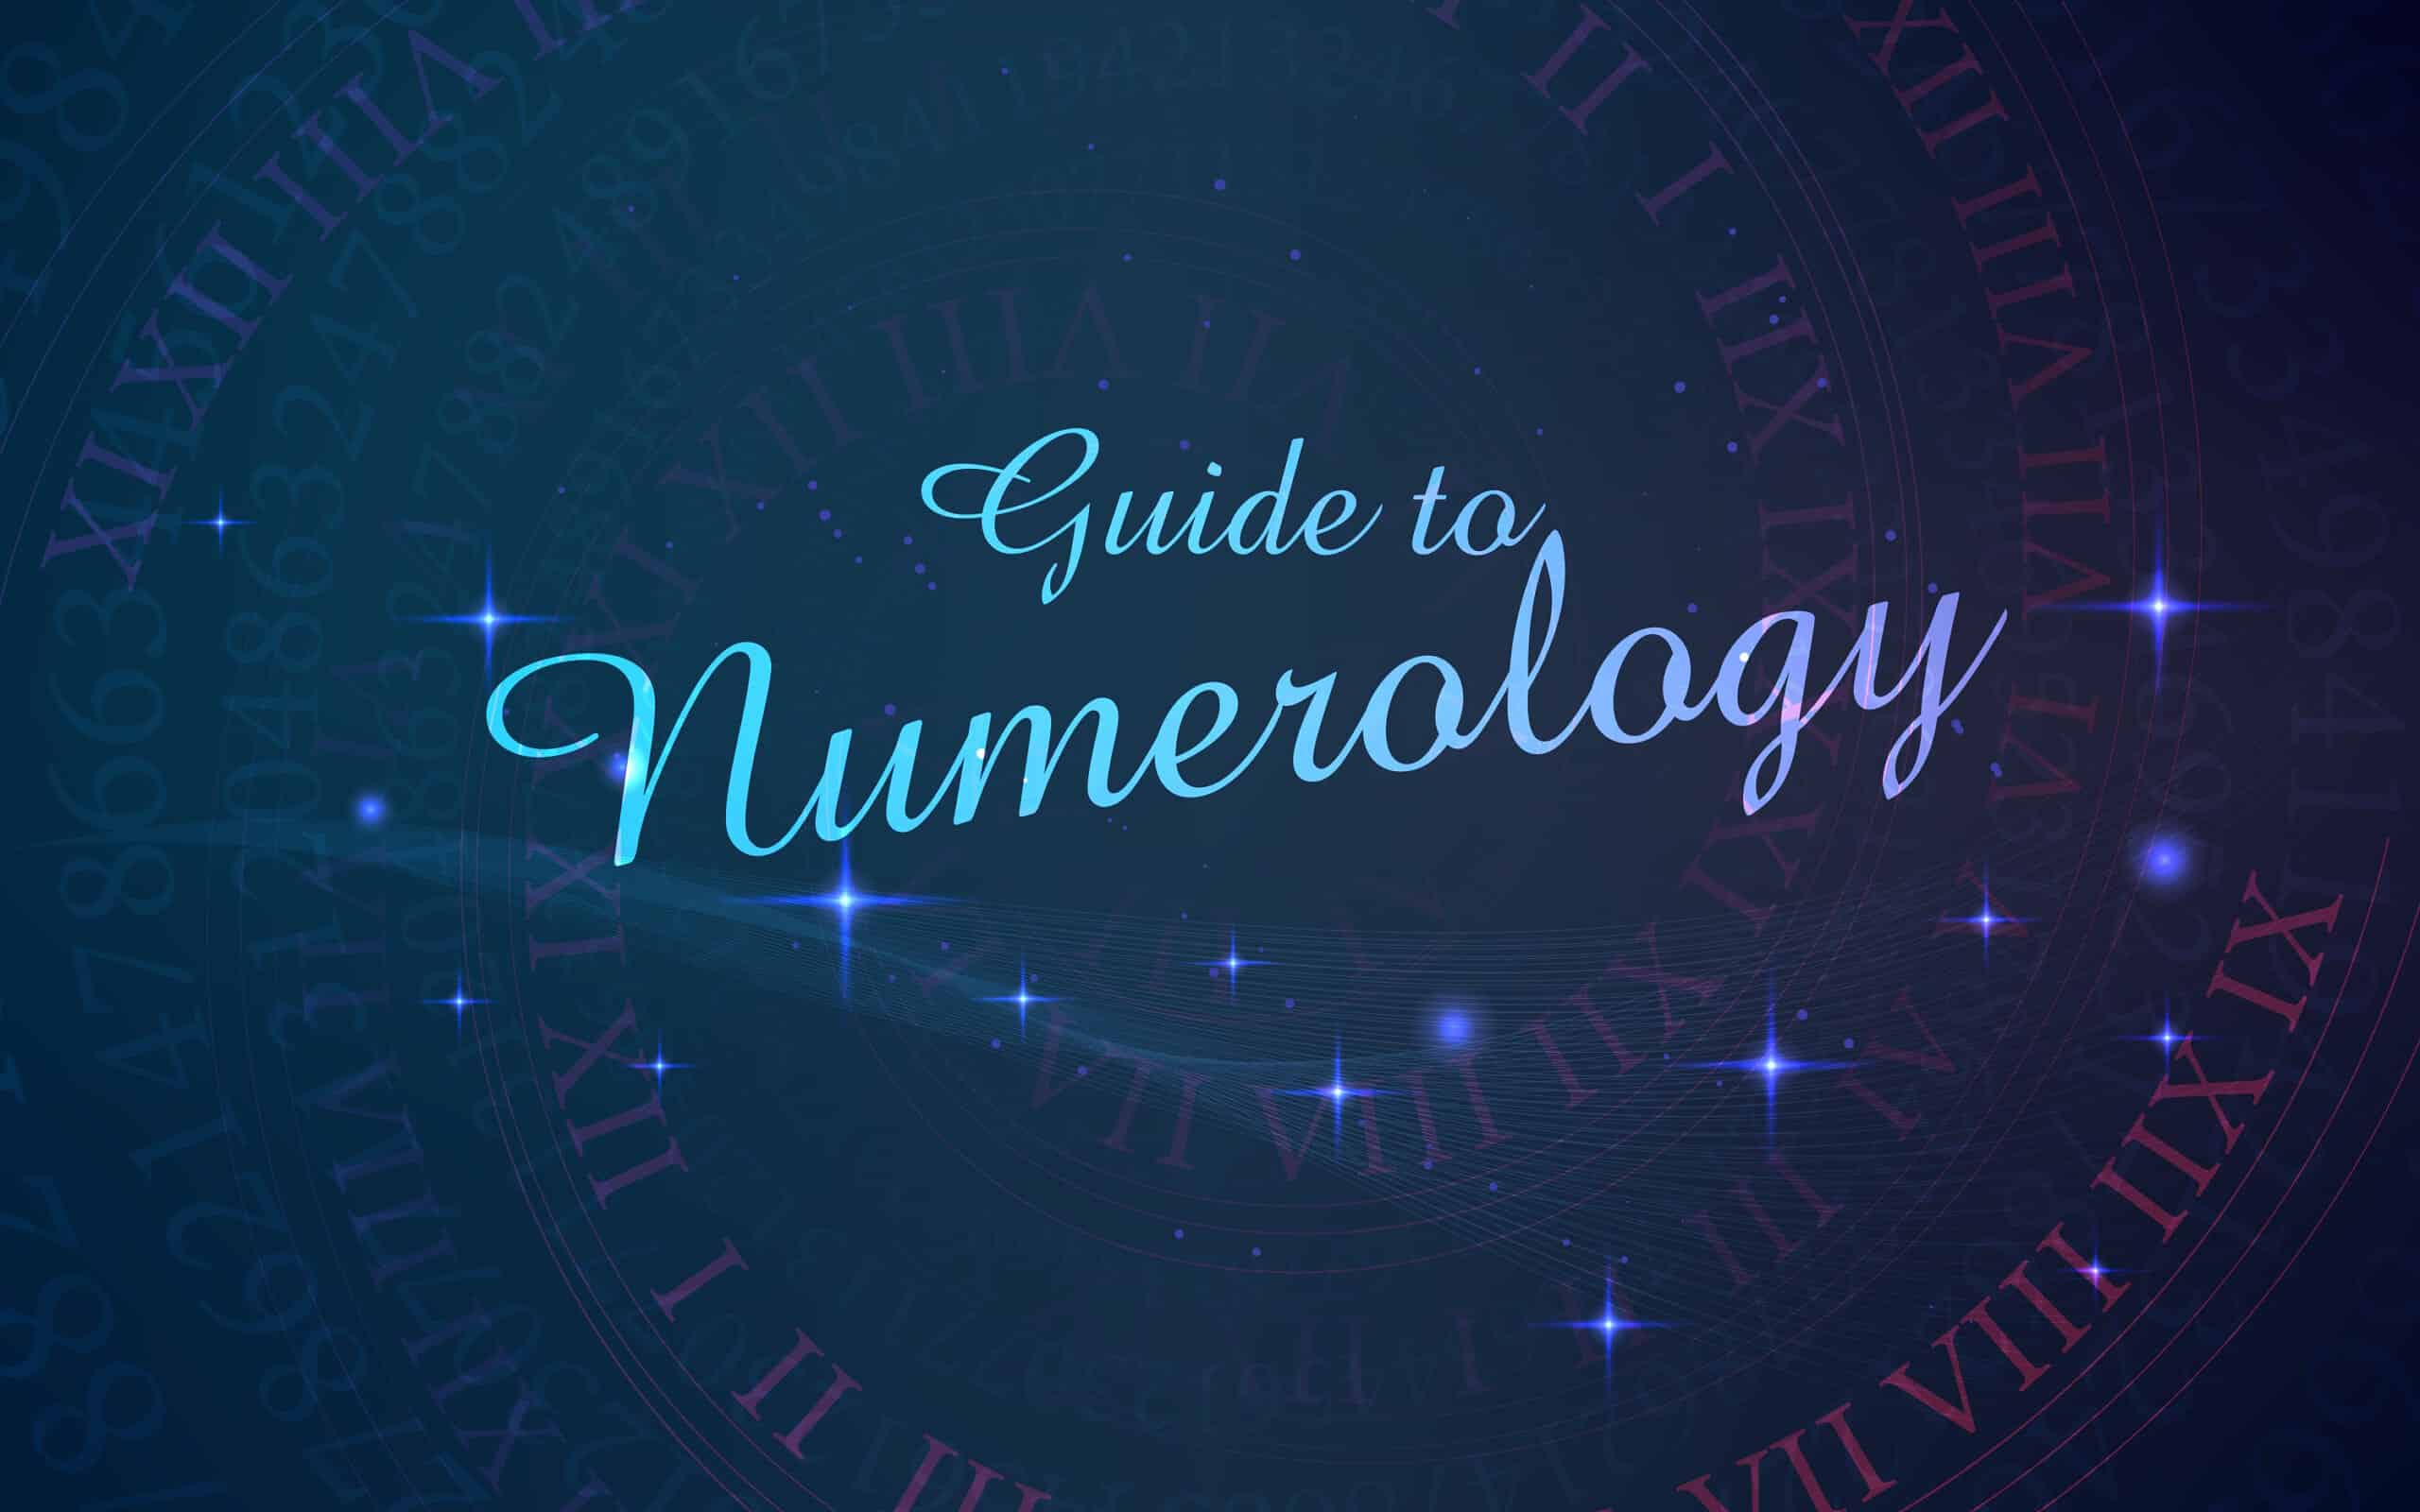 Numerology, Number, Abstract, Analyzing, Astrology